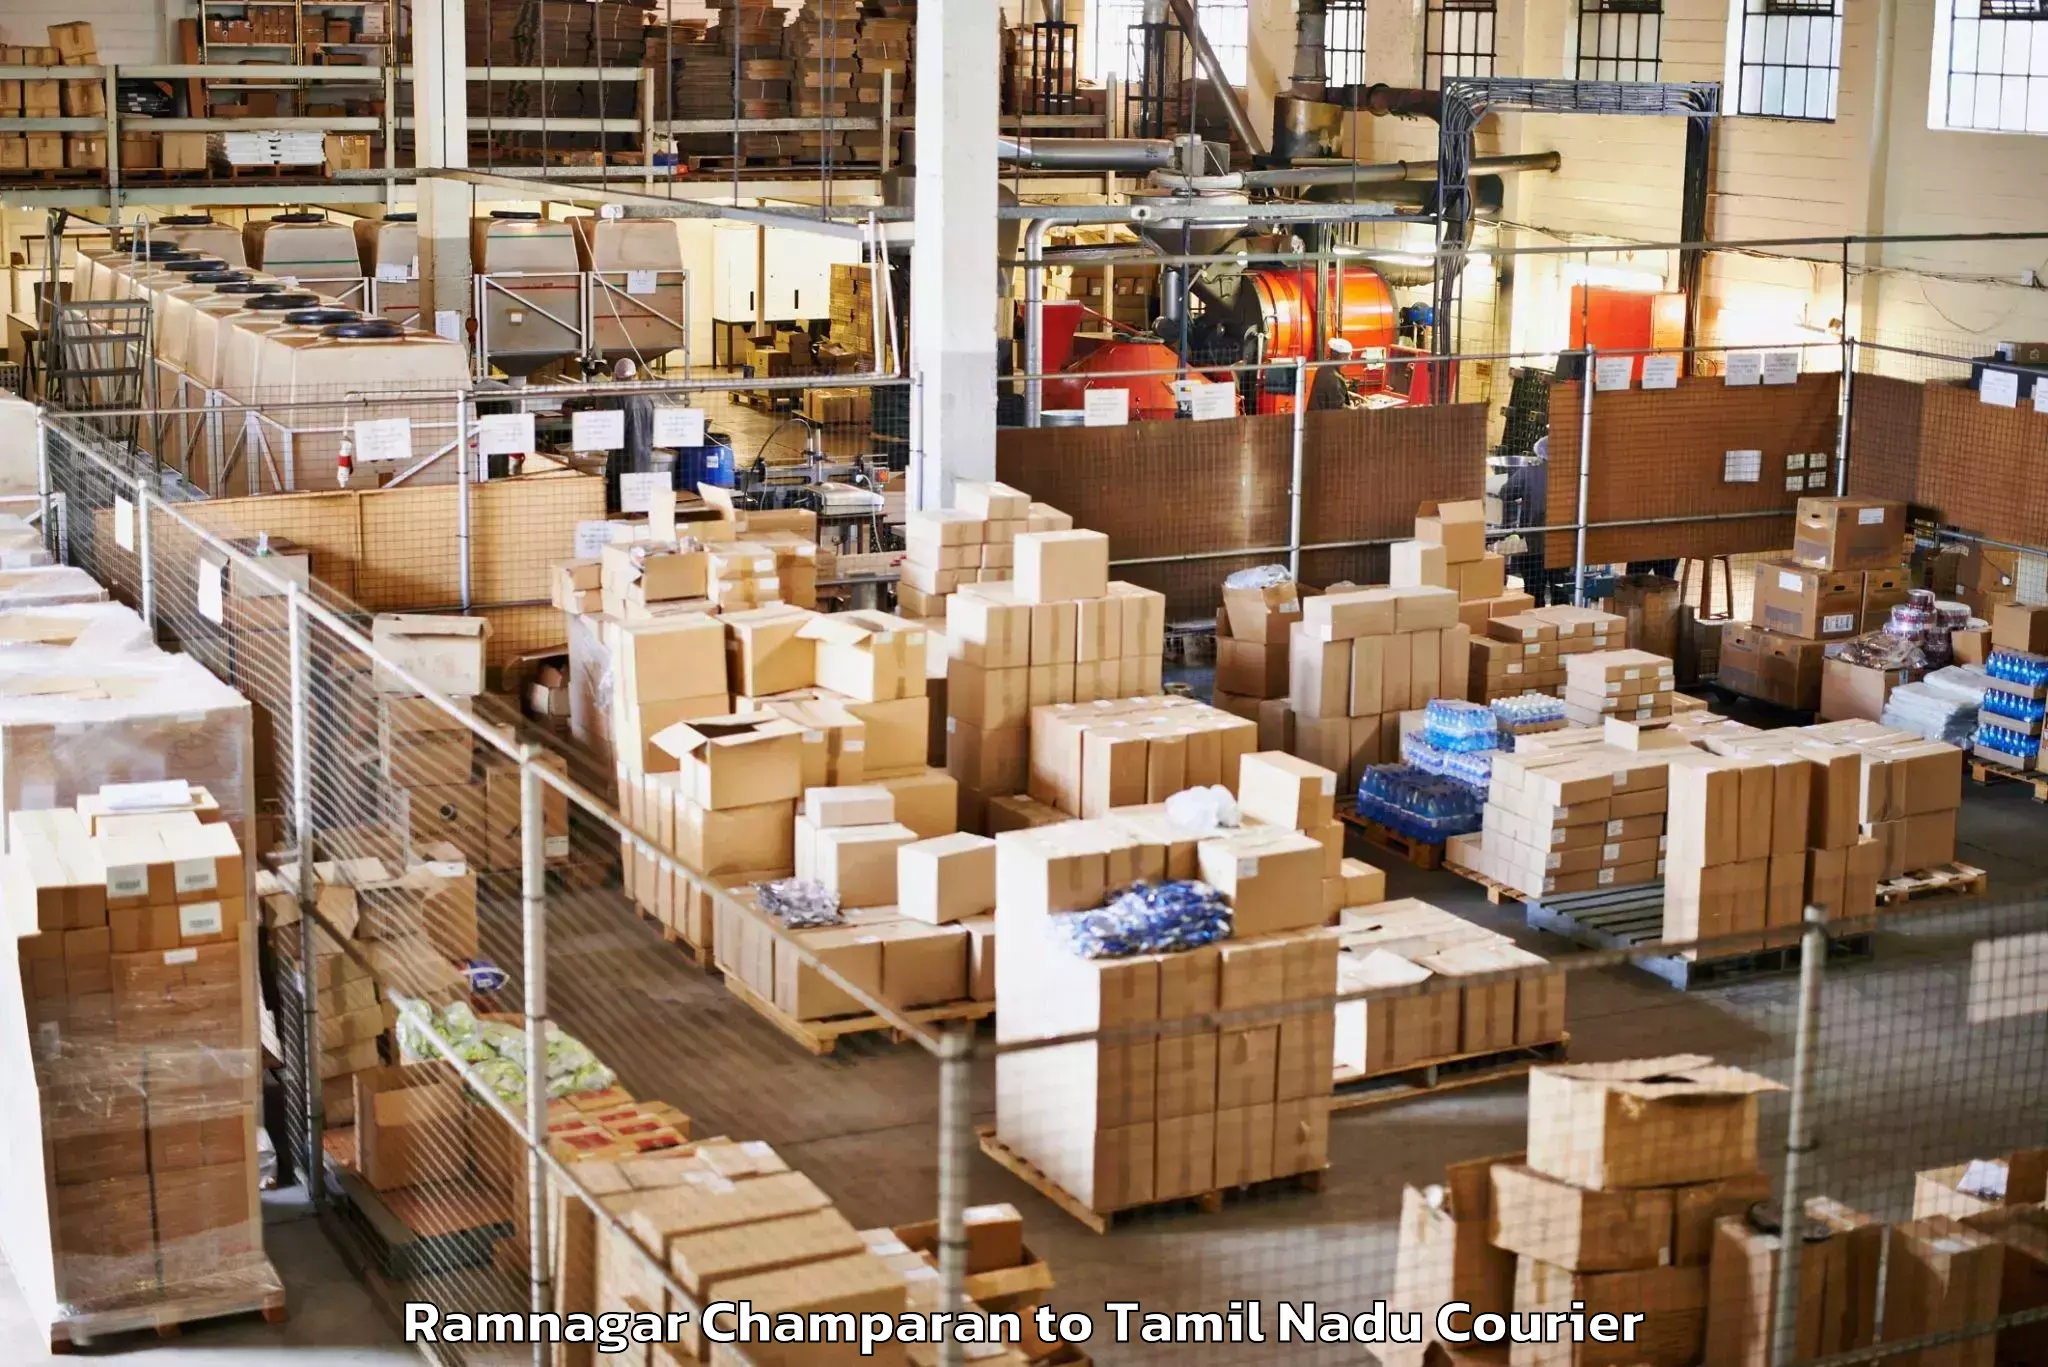 Emergency baggage service Ramnagar Champaran to Vellore Institute of Technology